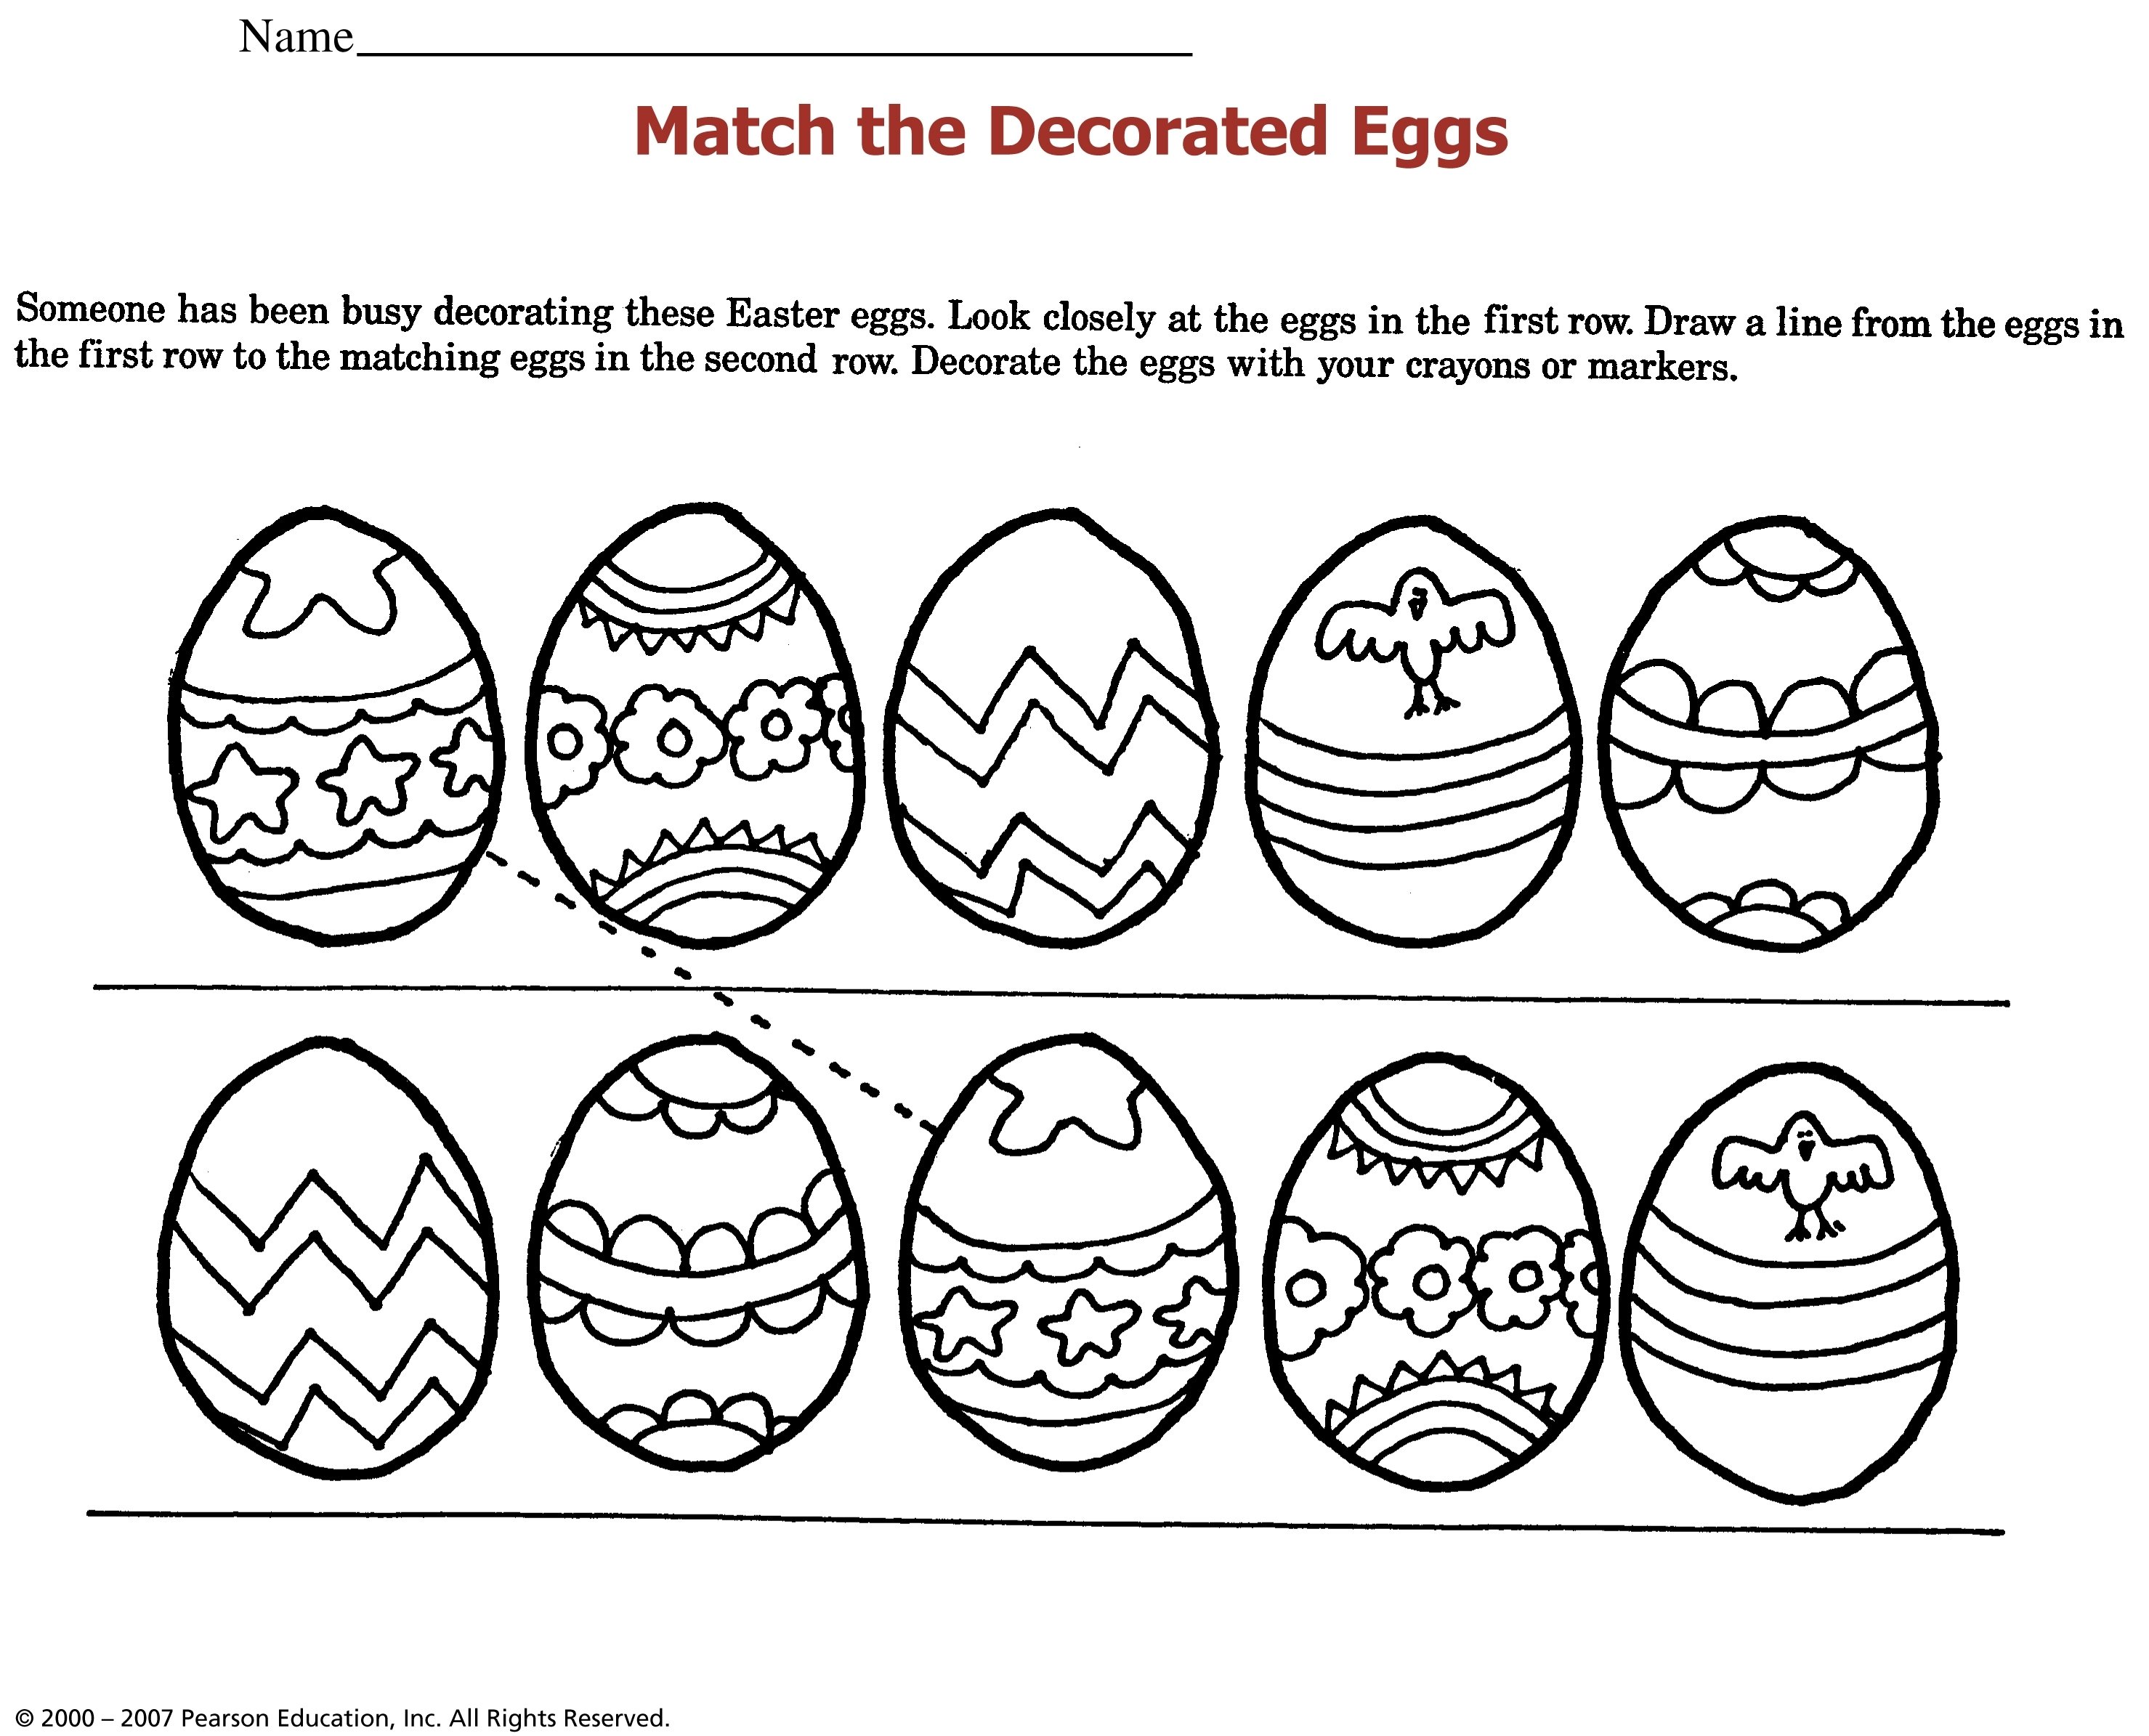 10 Great Easter Game Ideas For Adults printable easter activities smallfineprint 2022